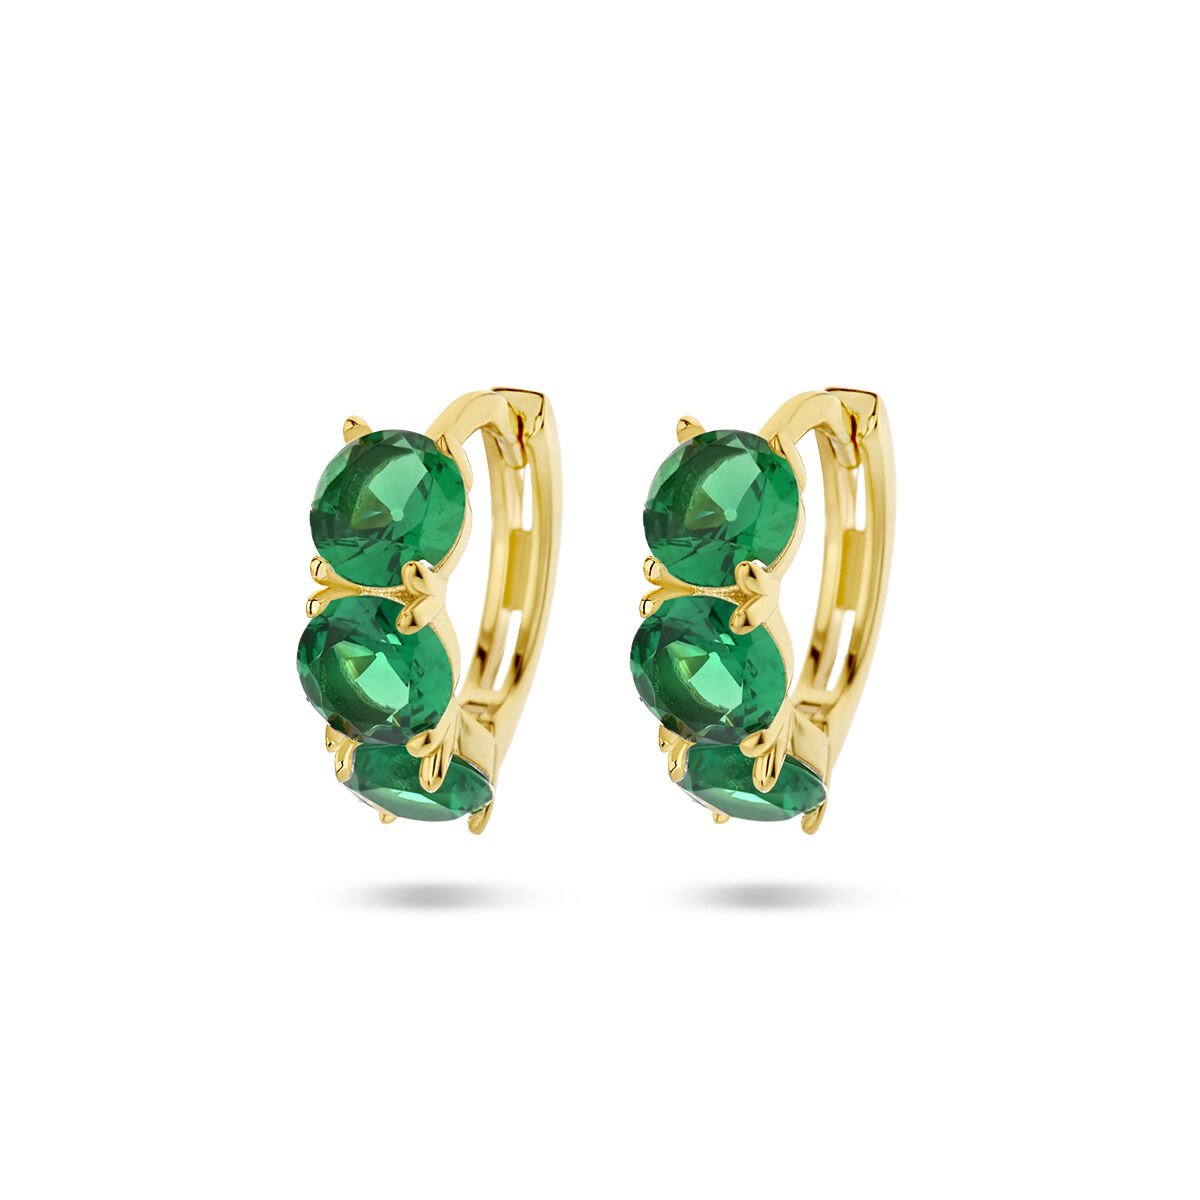 Silver Gold earring with green stones